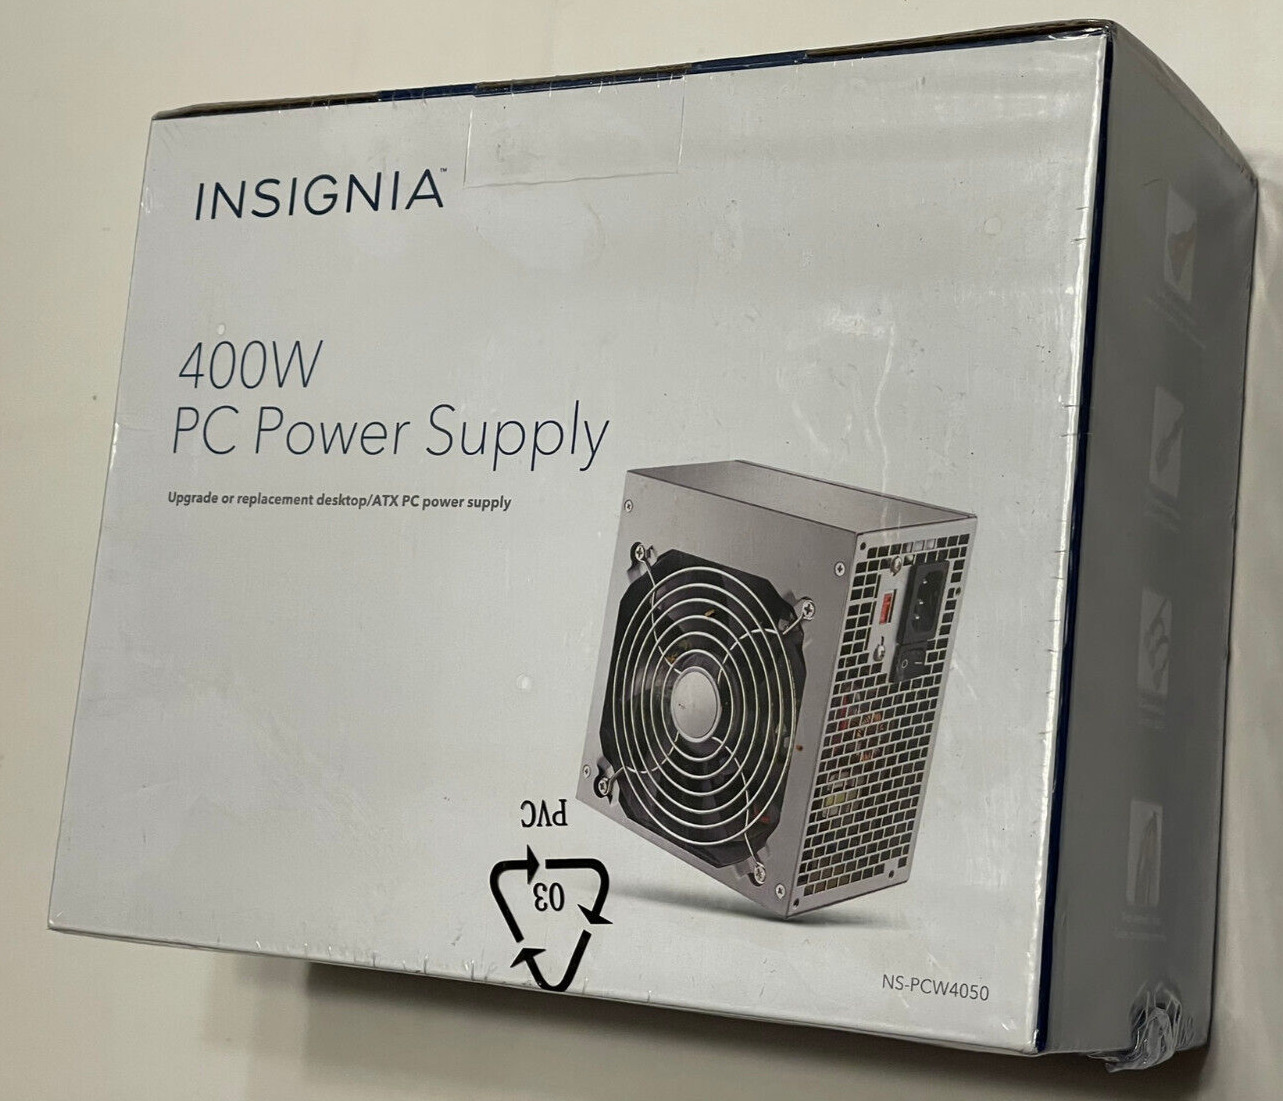 Brand New Insignia 400W PC Power Supply (NS-PCW4050) - Factory Sealed